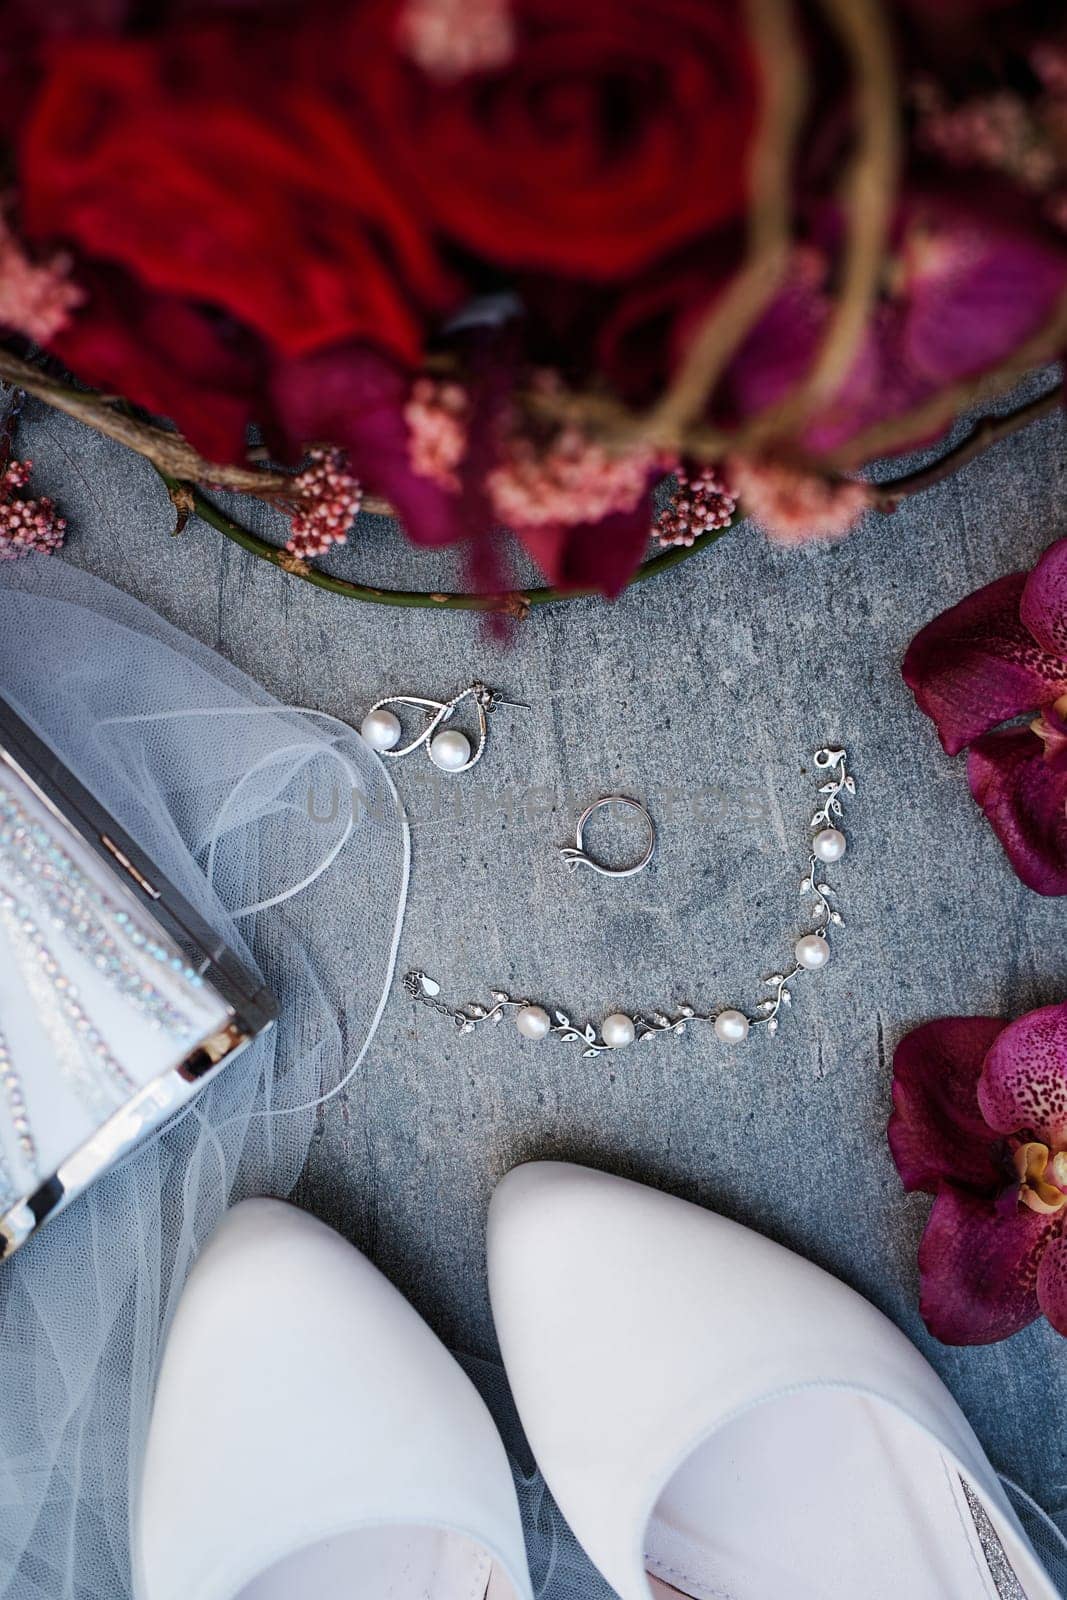 Pearl earrings and a bracelet lie next to the wedding ring on the table. Top view. High quality photo